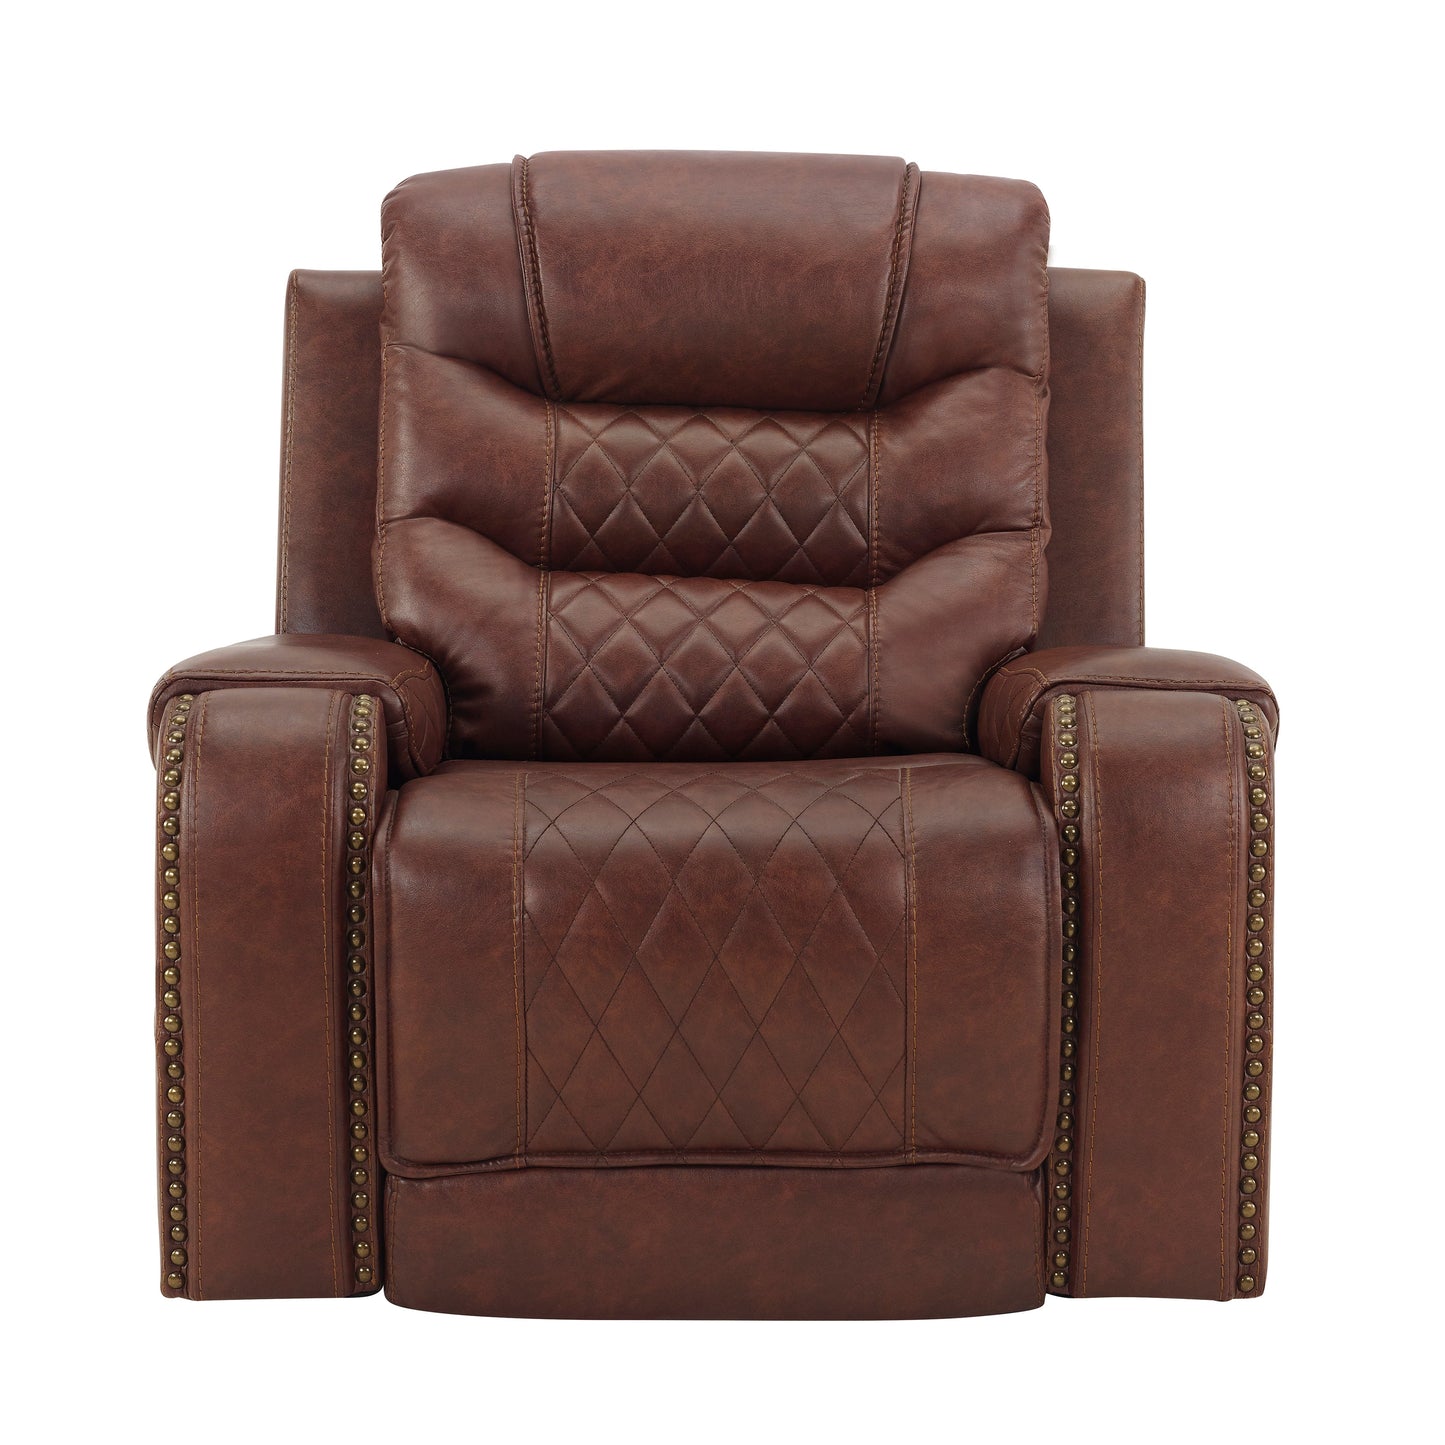 Klens Faux Leather Swivel Glider Recliner with Nailhead Trim, Brown